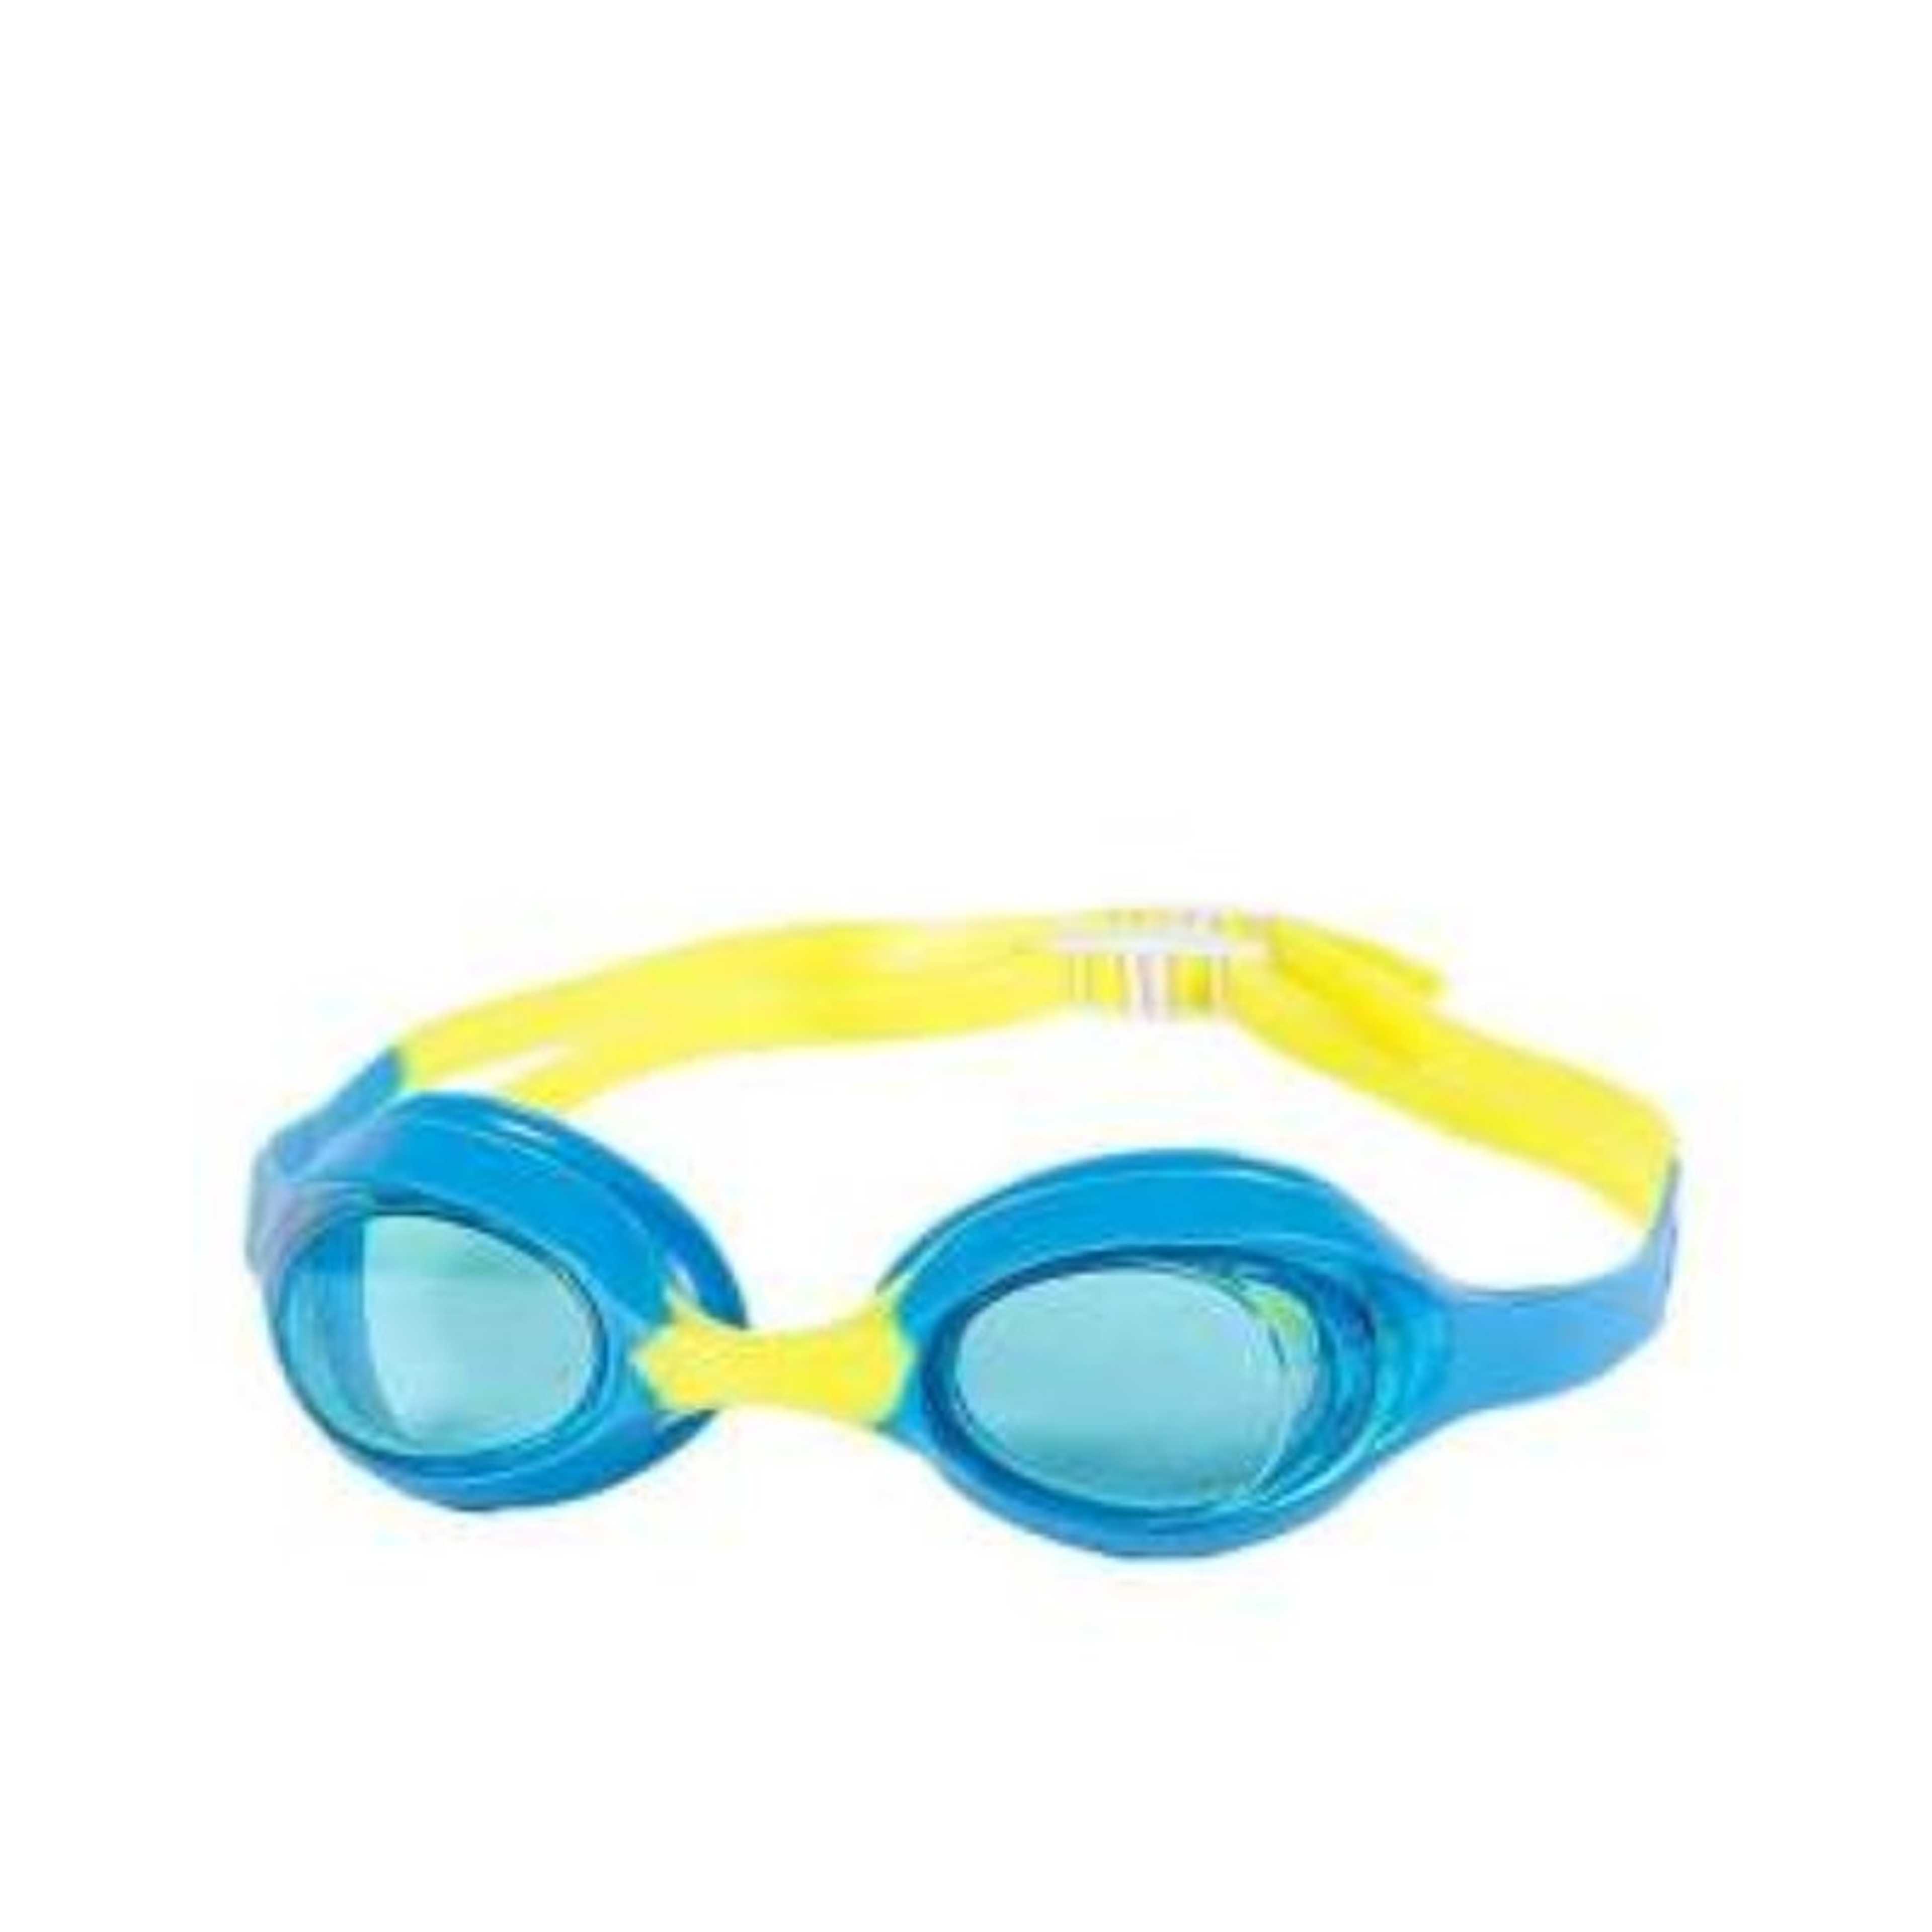 Grilong Swimming Goggle For Kids - Blue